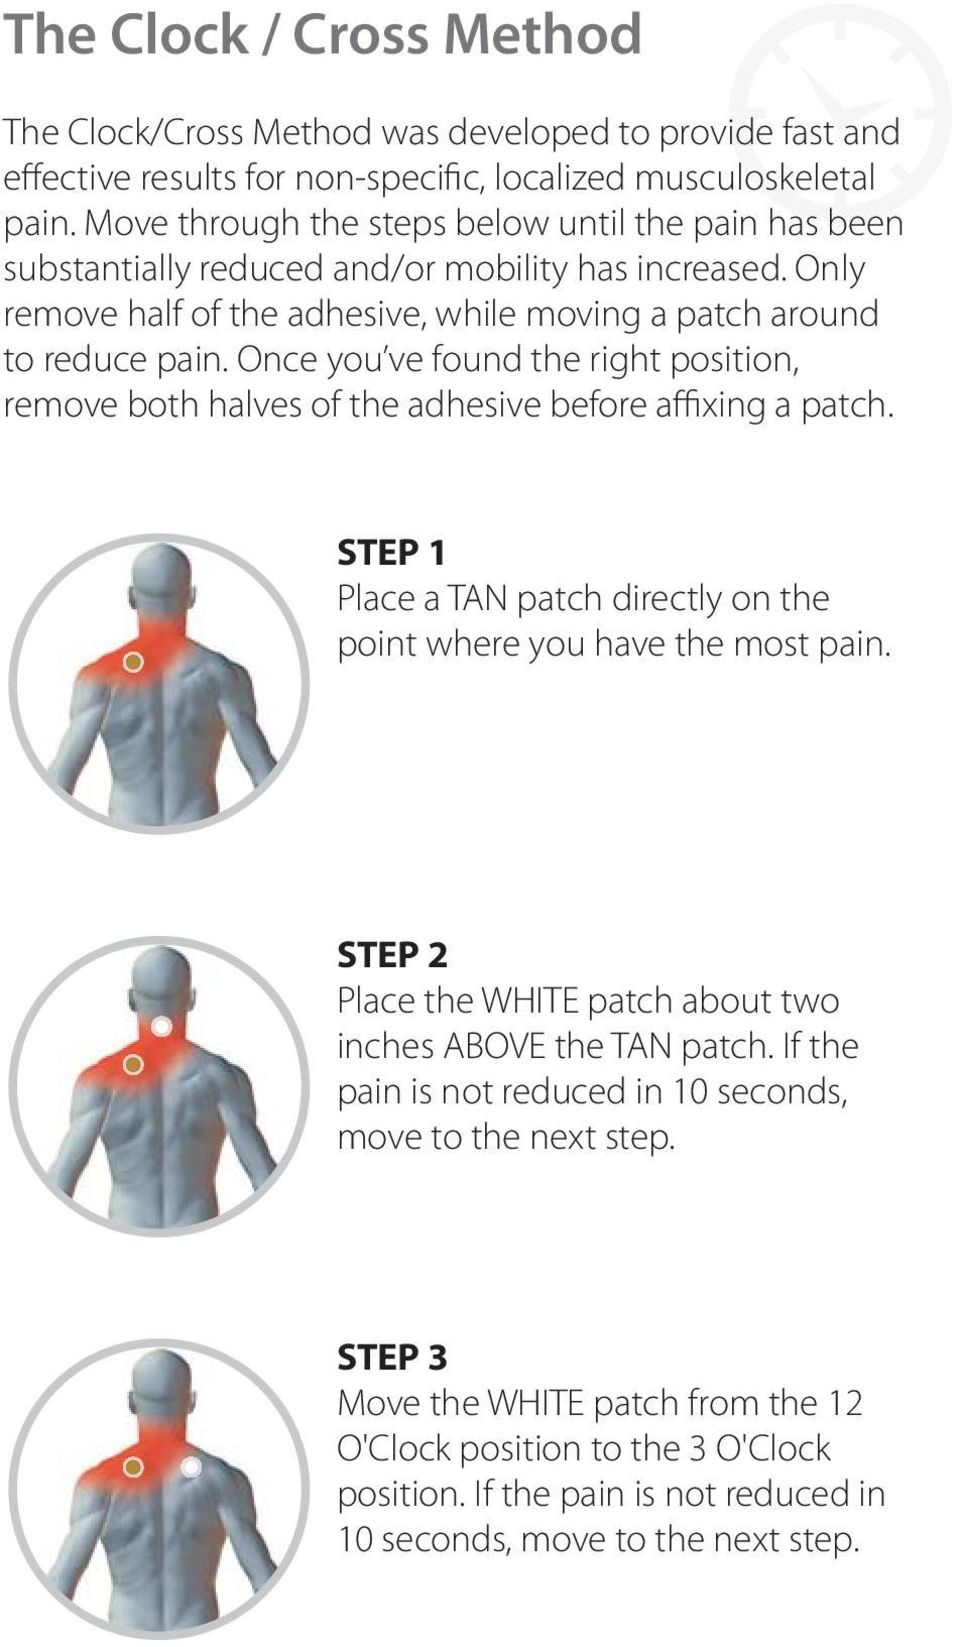 Once you ve found the right position, remove both halves of the adhesive before affixing a patch. STEP 1 Place a TAN patch directly on the point where you have the most pain.